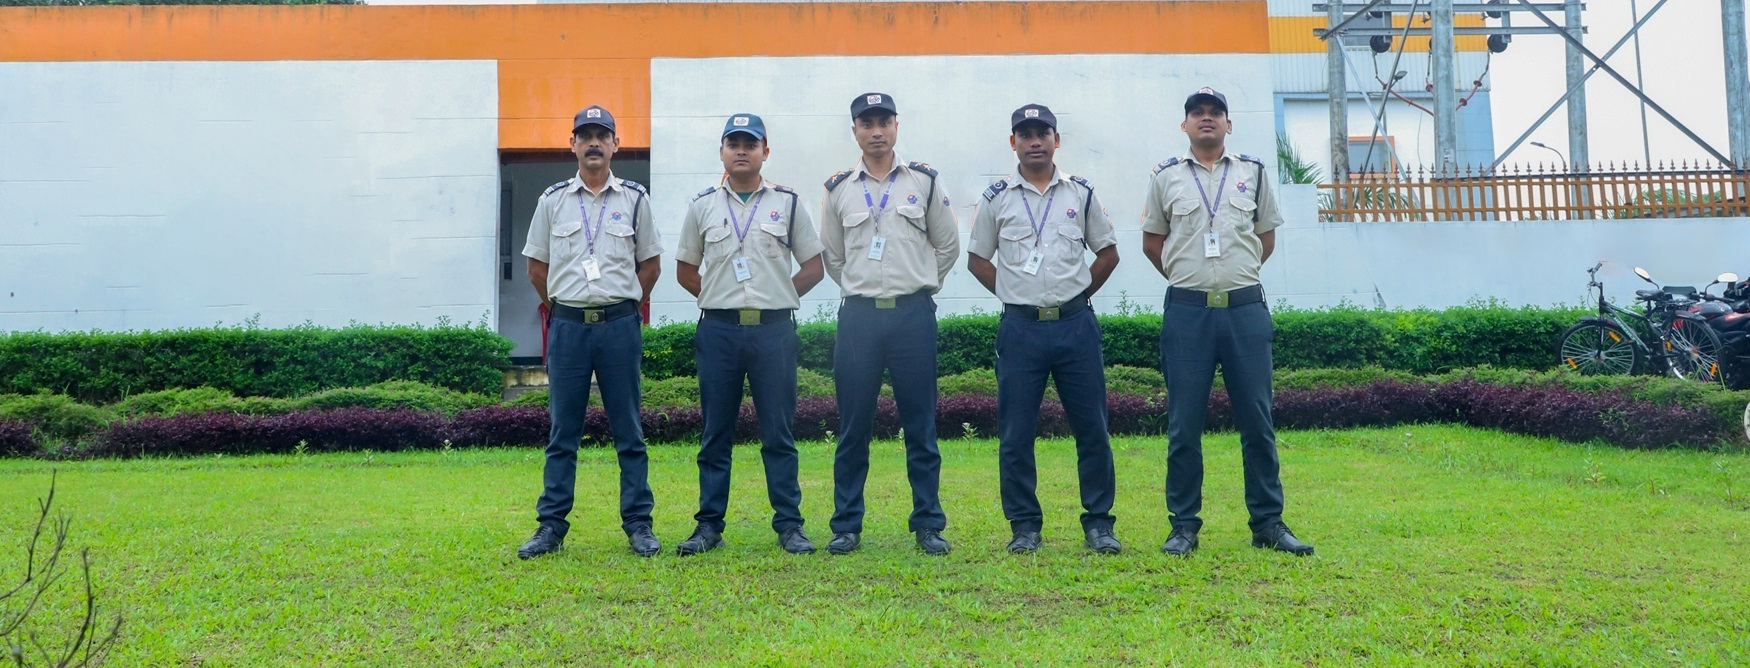 Omega Security Service - Security Agency in Guwahati - Security Guards